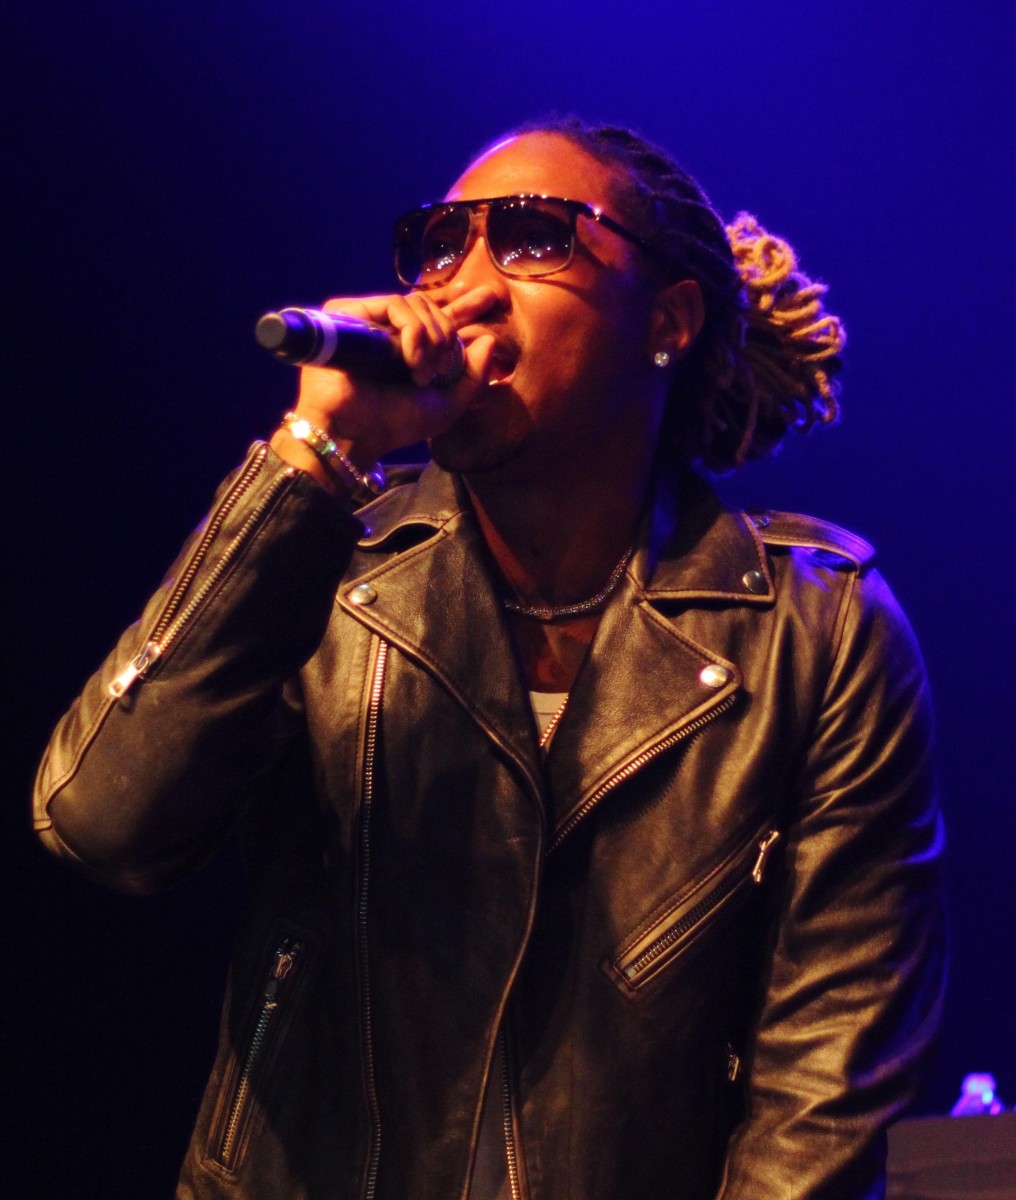 Future at Sound Academy in Toronto on July 11, 2014.